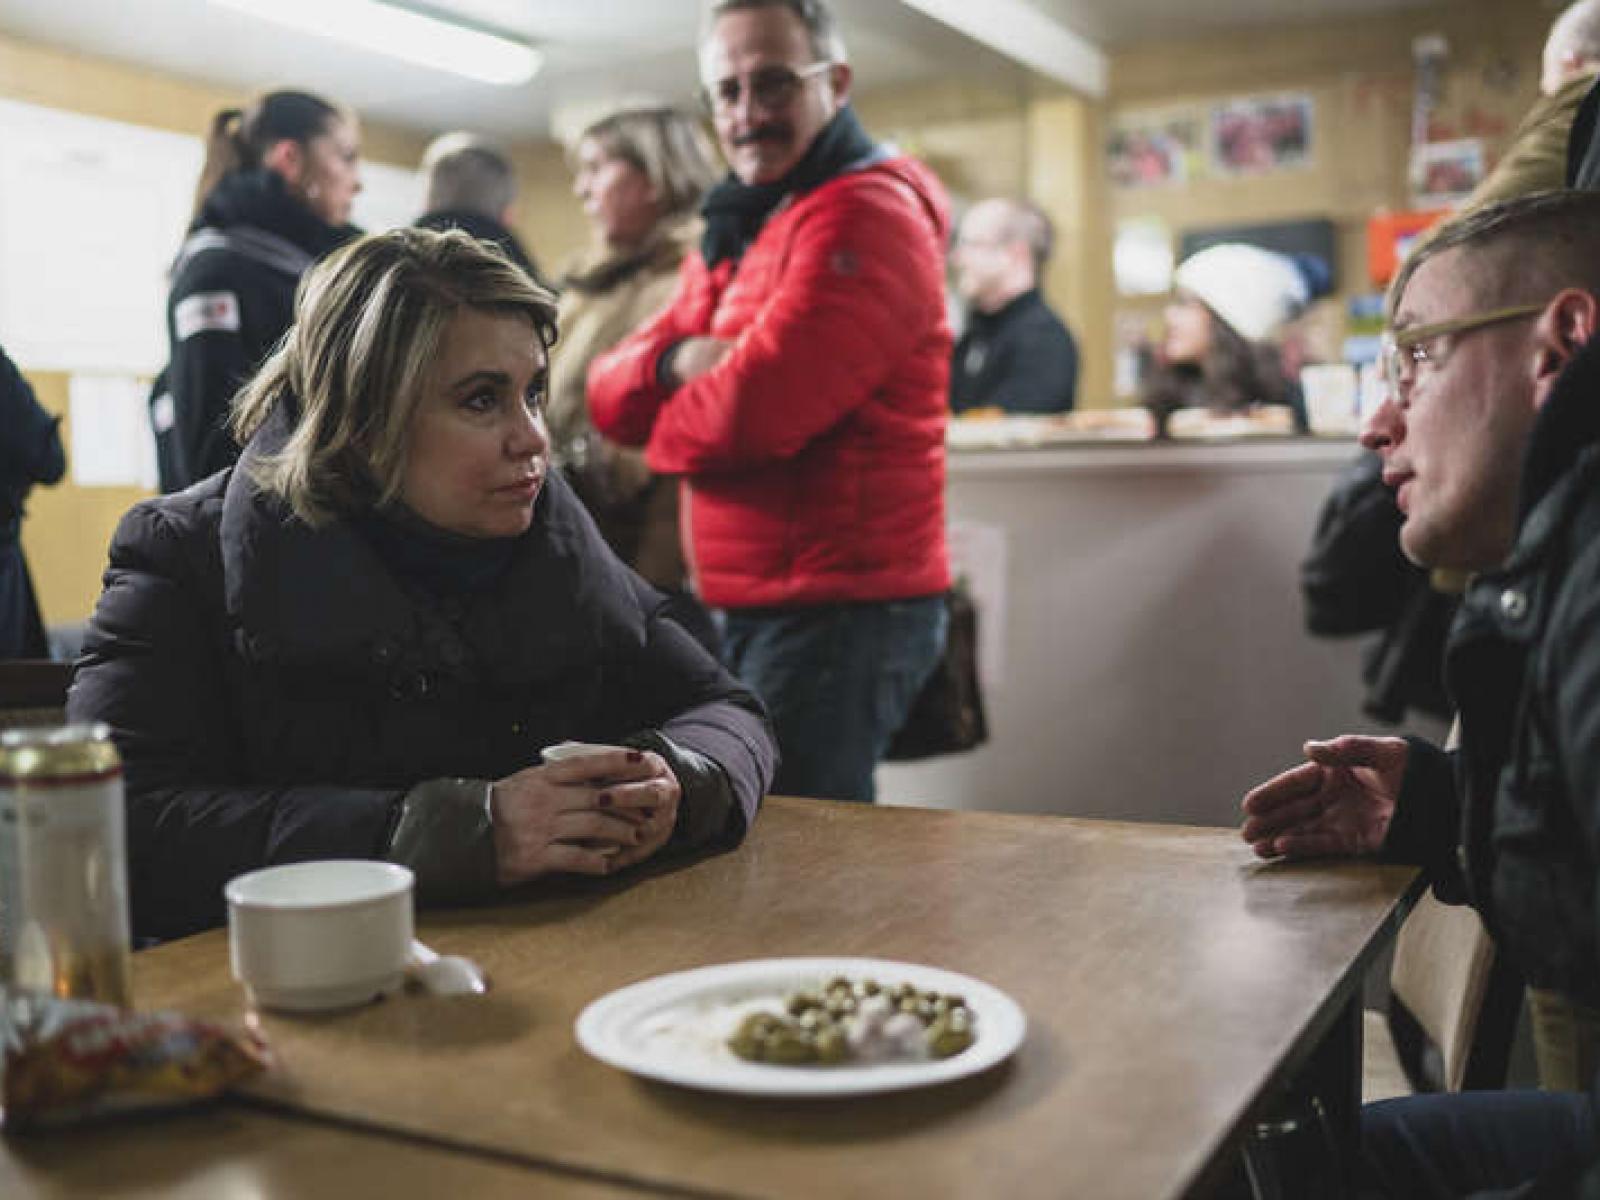 The Grand Duchess talking to homeless people